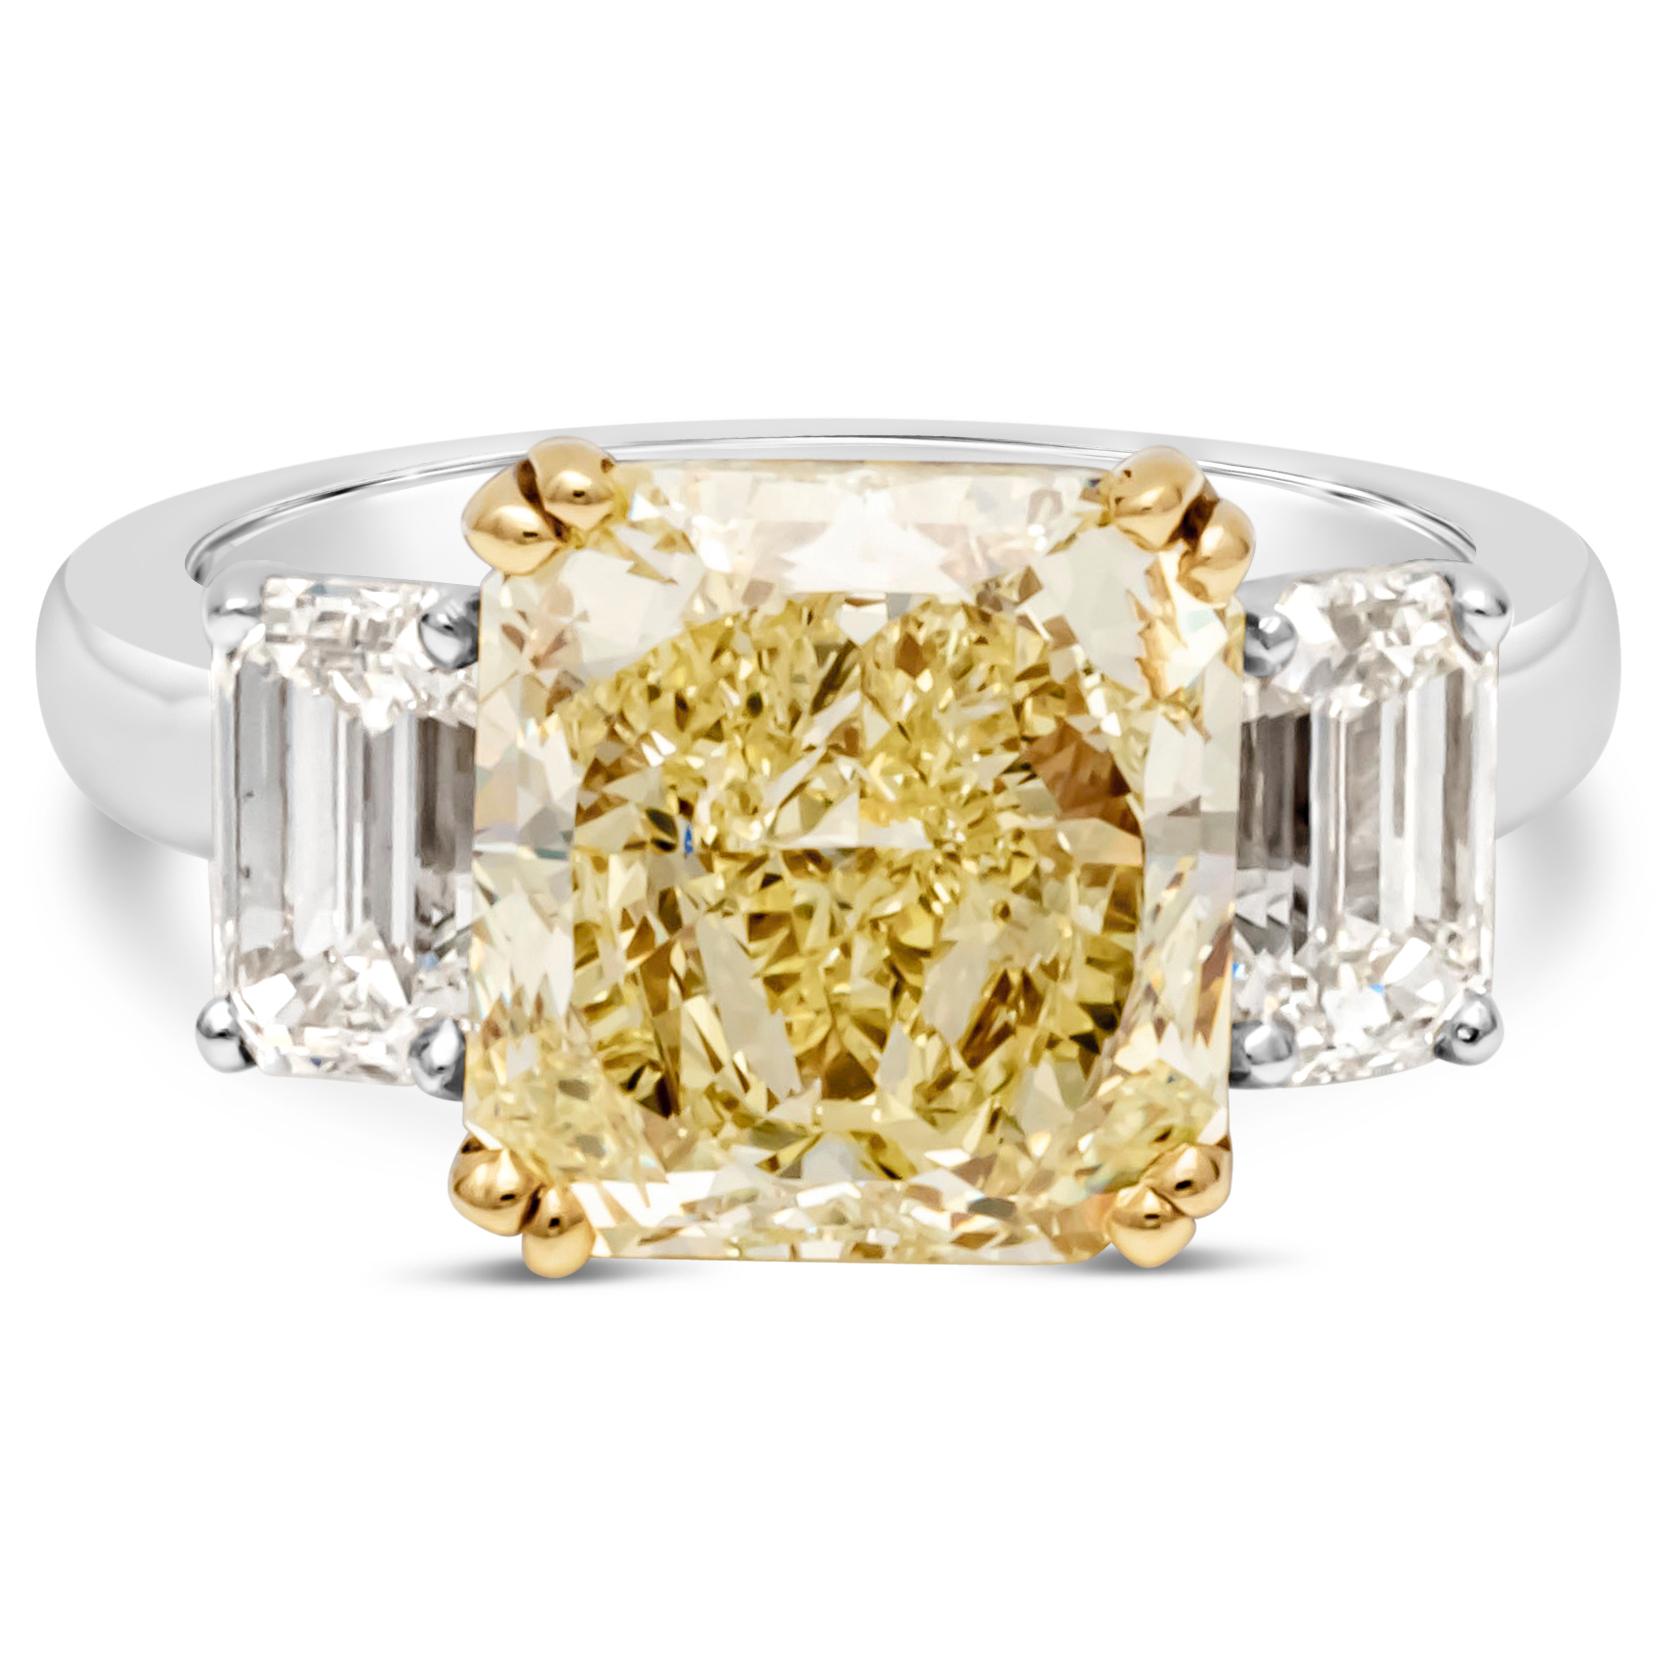 A color-rich three-stone engagement ring, showcasing a 4.68 carats radiant cut yellow diamond certified by GIA as Fancy Intense Yellow color and VS2 clarity, set in a timeless eight prong basket made of 18K yellow gold. Flanking the center diamond